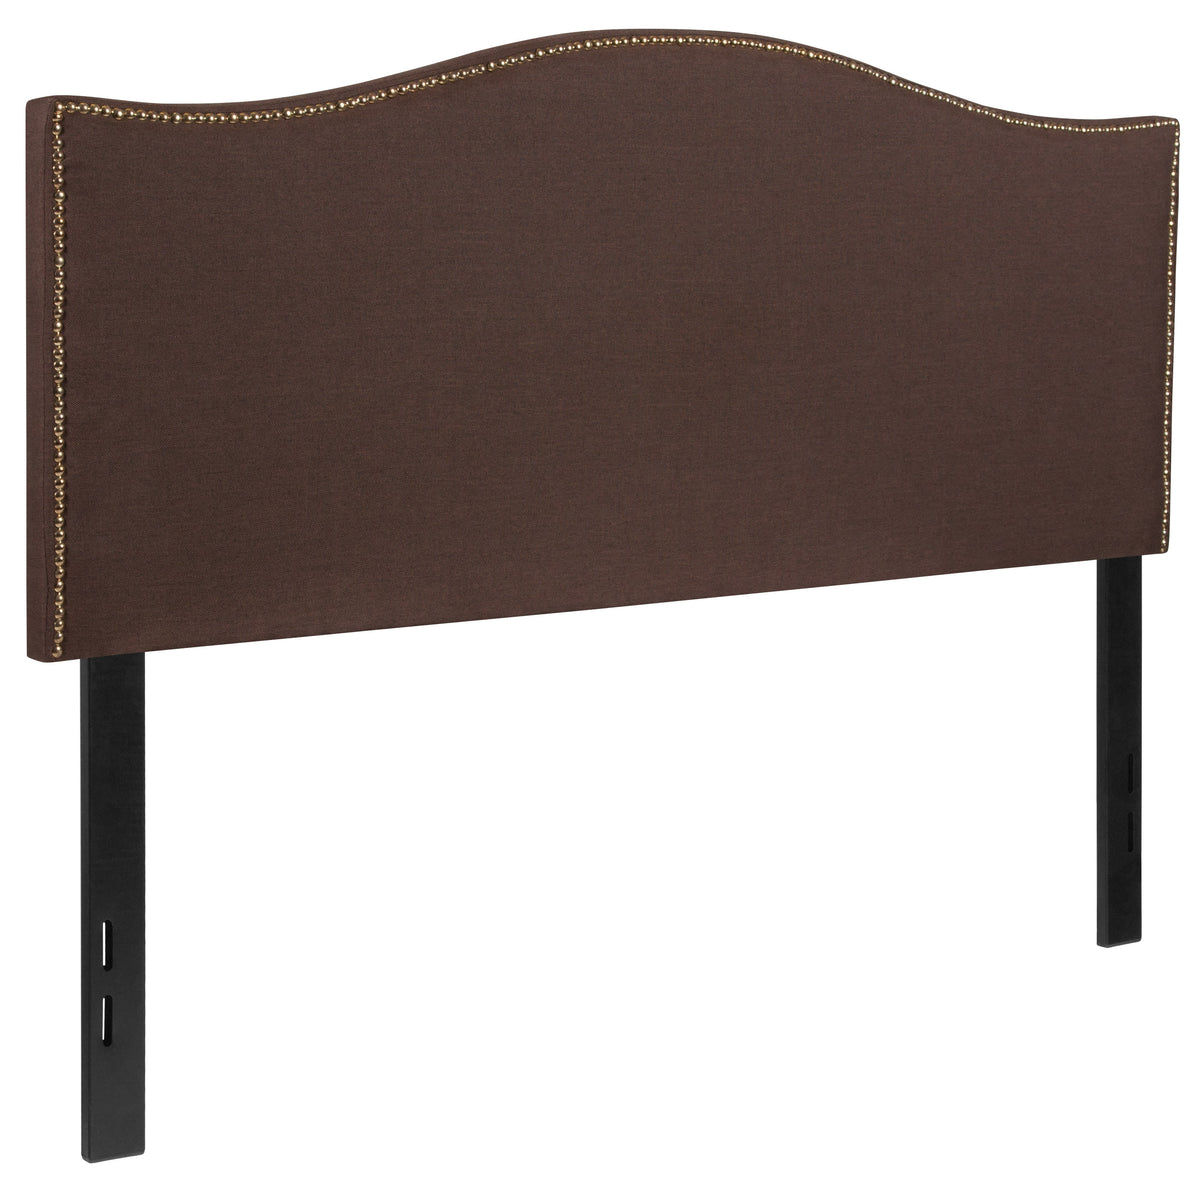 Dark Brown,Full |#| Upholstered Full Size Arched Headboard with Accent Nail Trim in Dk Brown Fabric